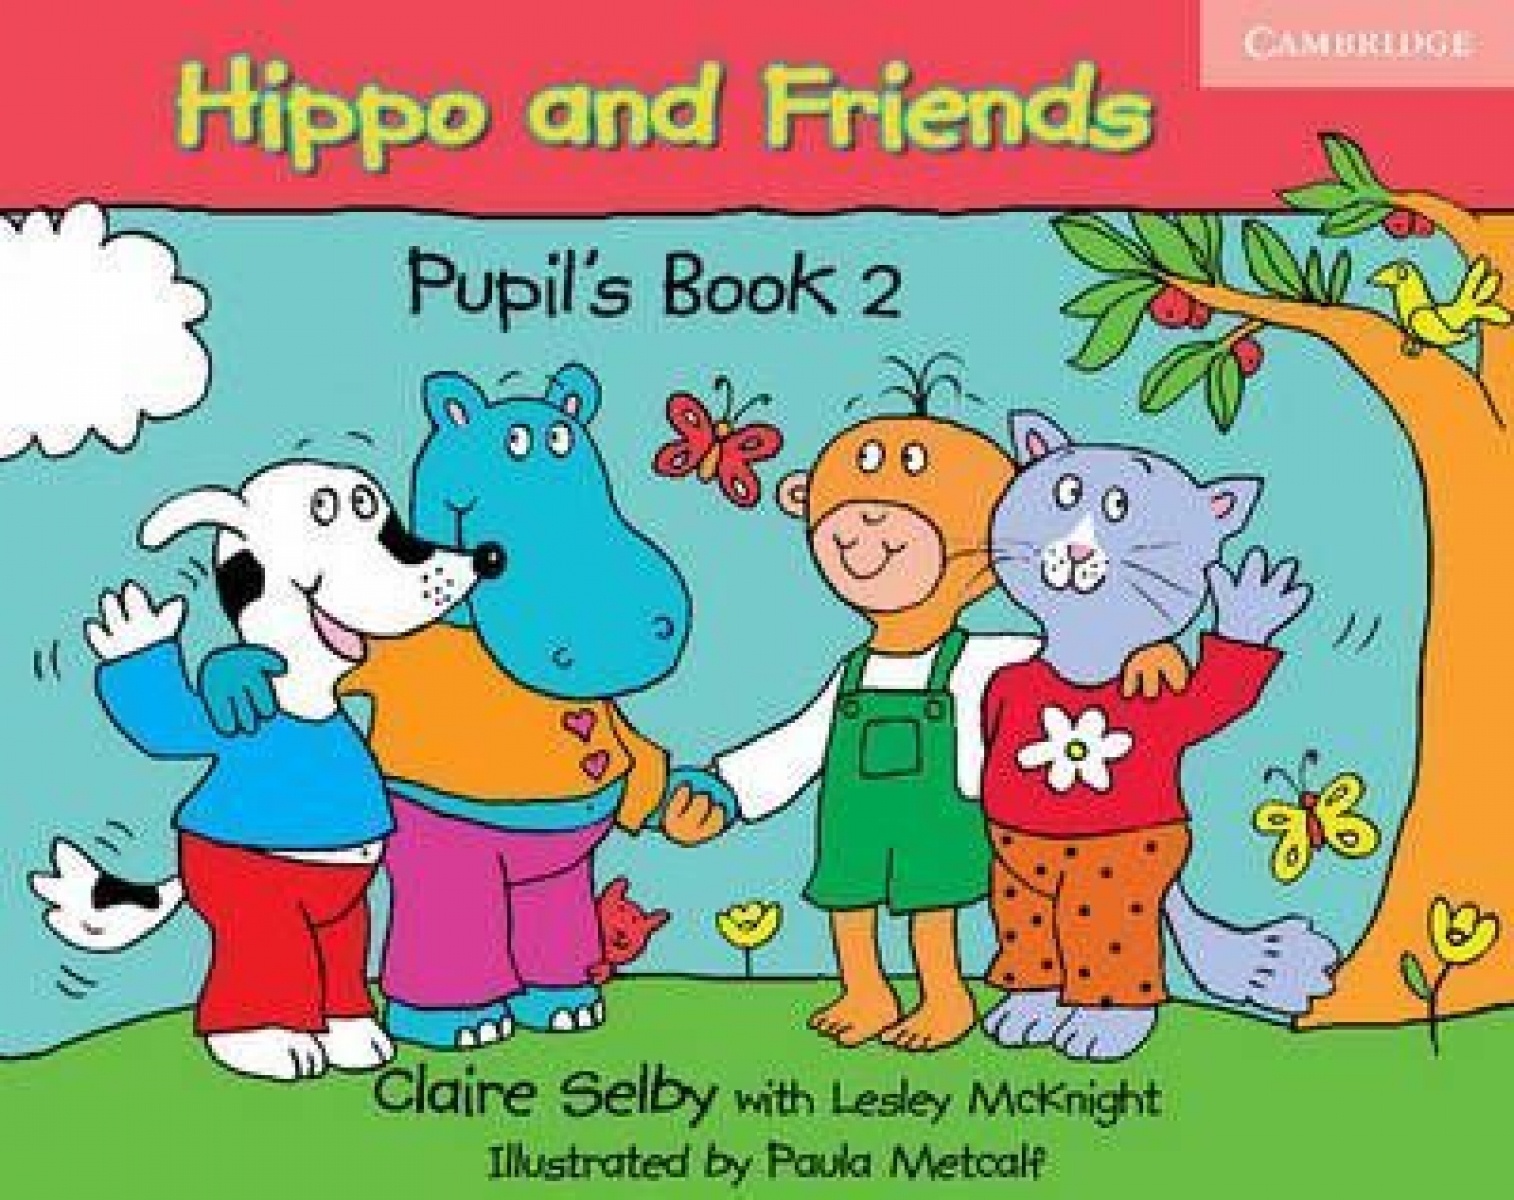 Claire Selby, Lesley McKnight Hippo and Friends 2 Pupil's Book 